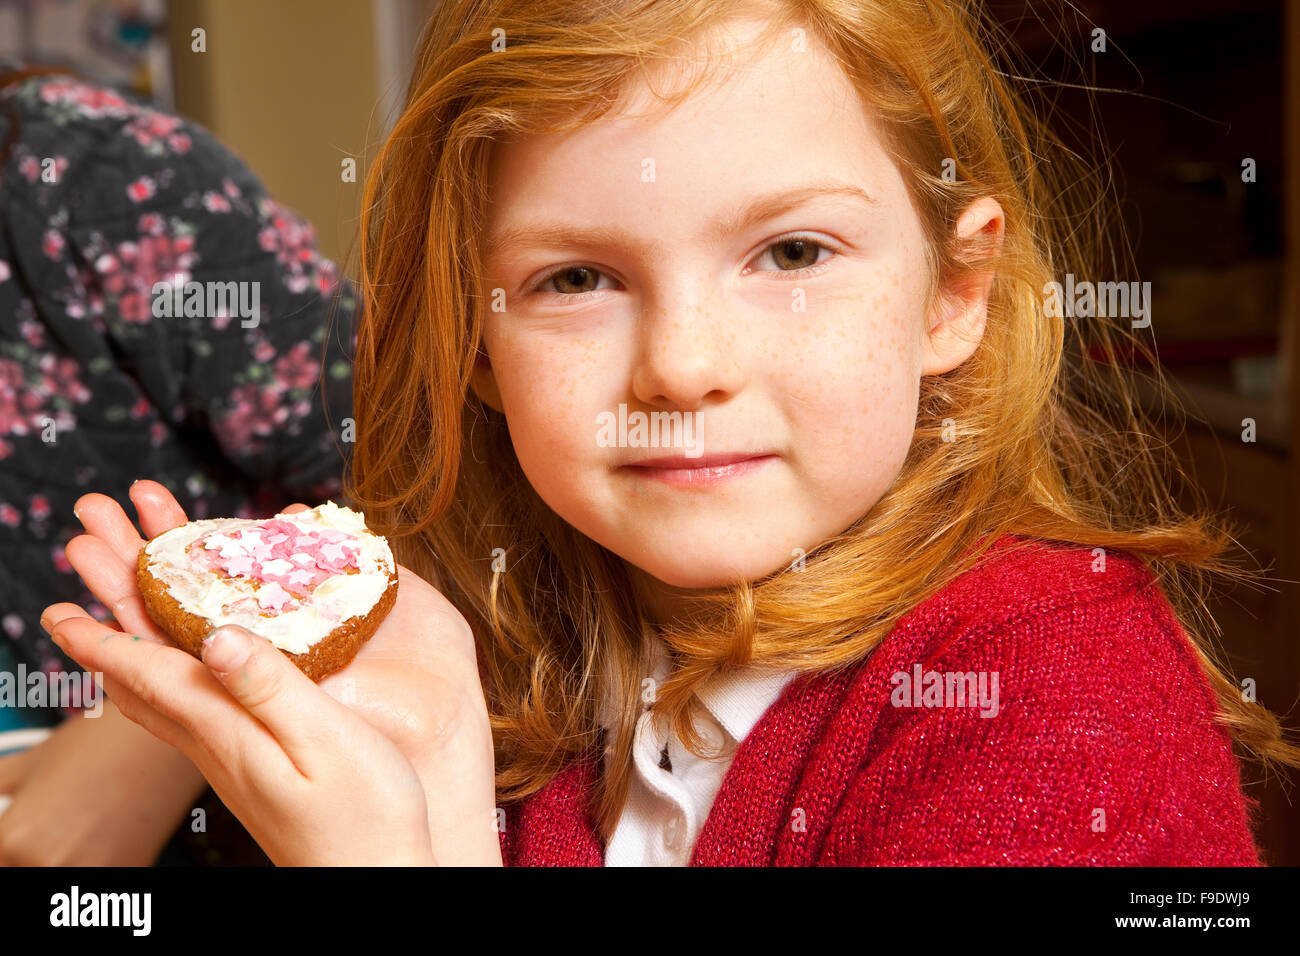 Look What I Made. A young five year old girl holds her gingerbread creation decorated with icing and pink and white candy stars Stock Photo